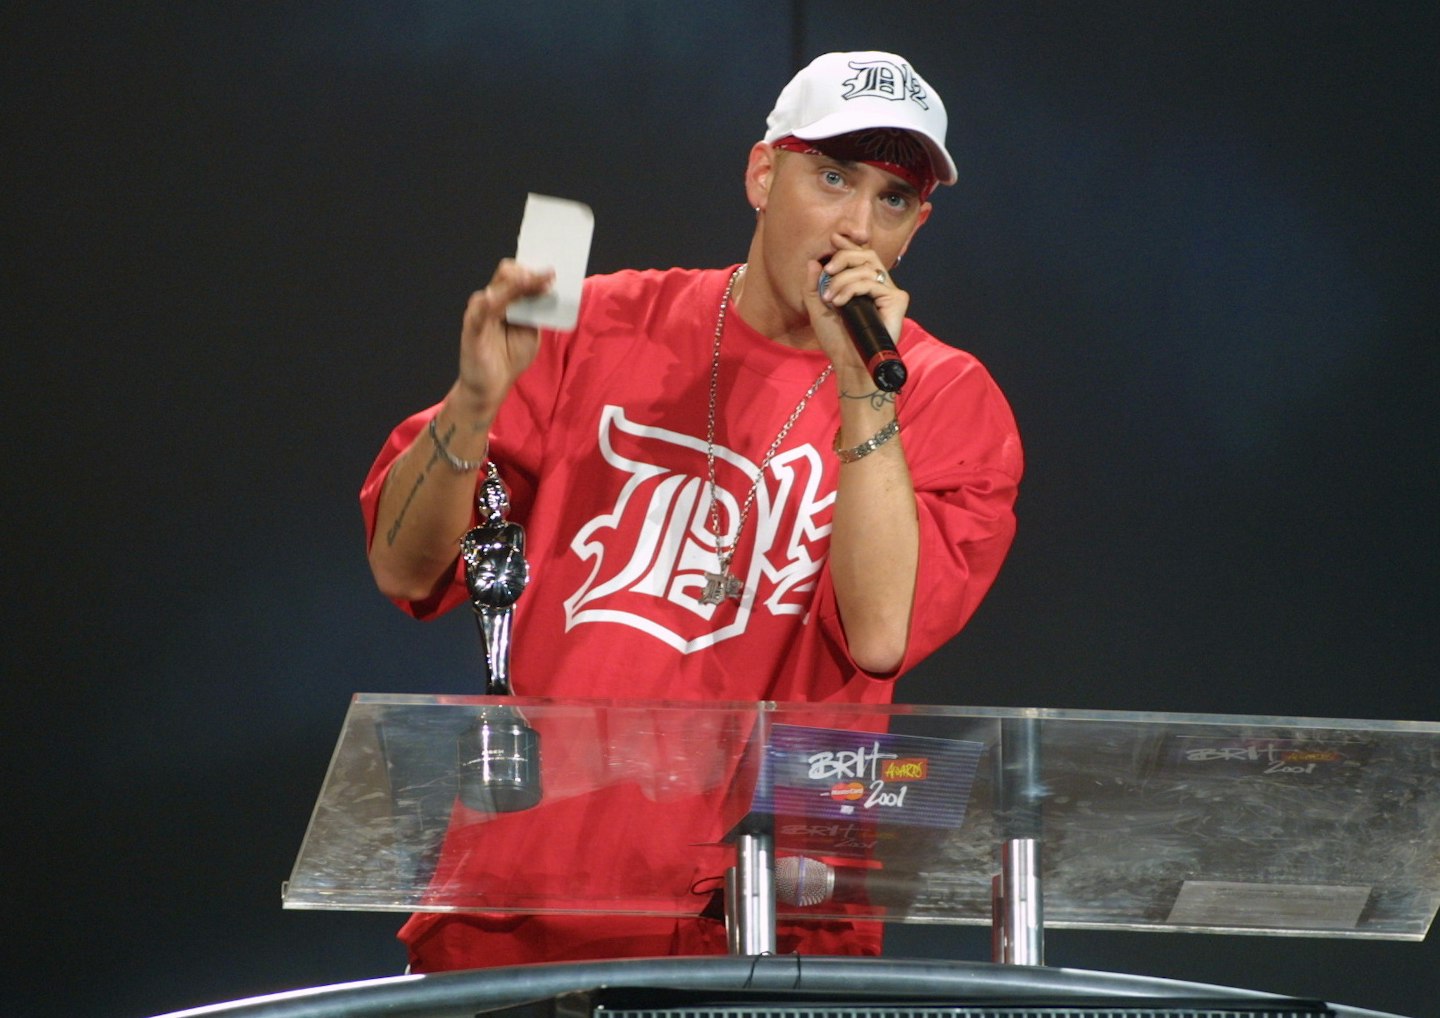 Eminem in a red D12 tshirt at the BRIT Awards 2001